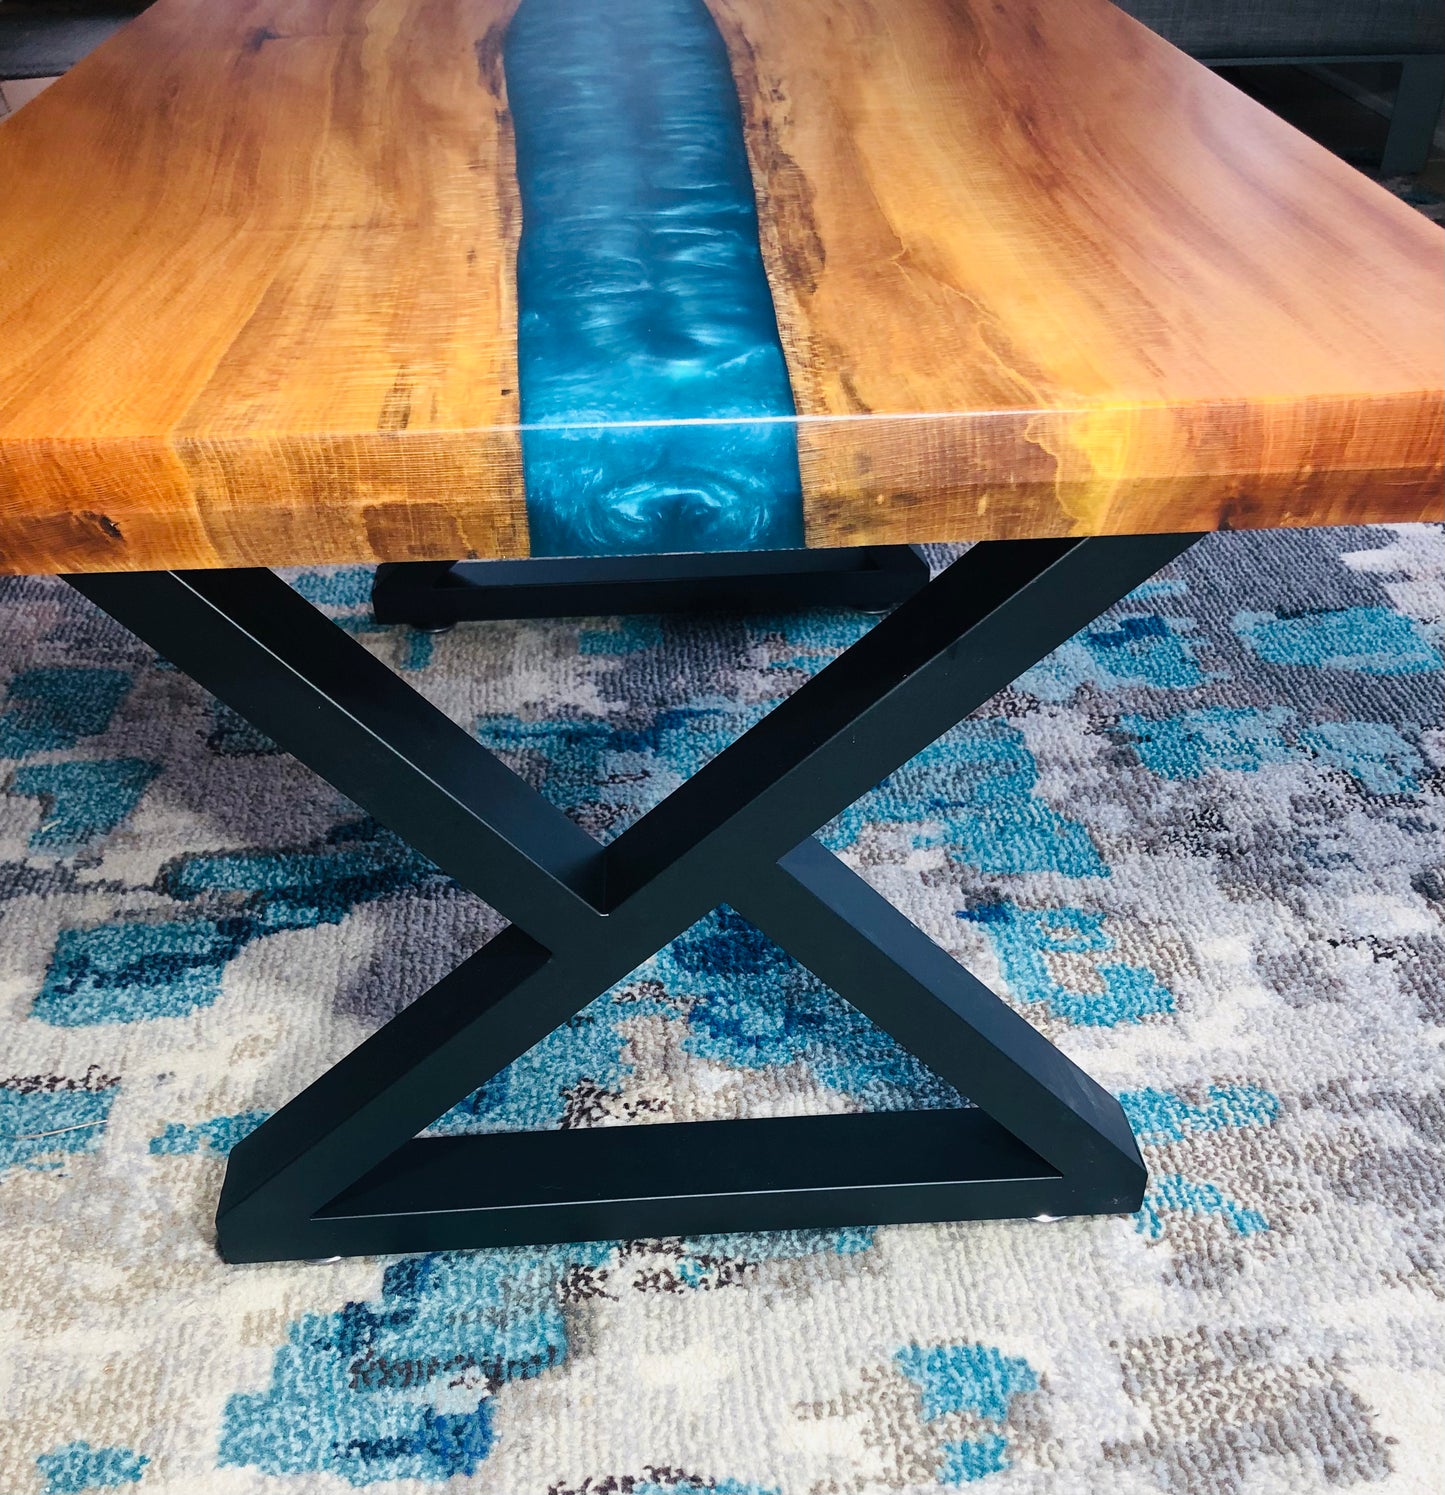 Sycamore and Emerald Green Epoxy Coffee Table